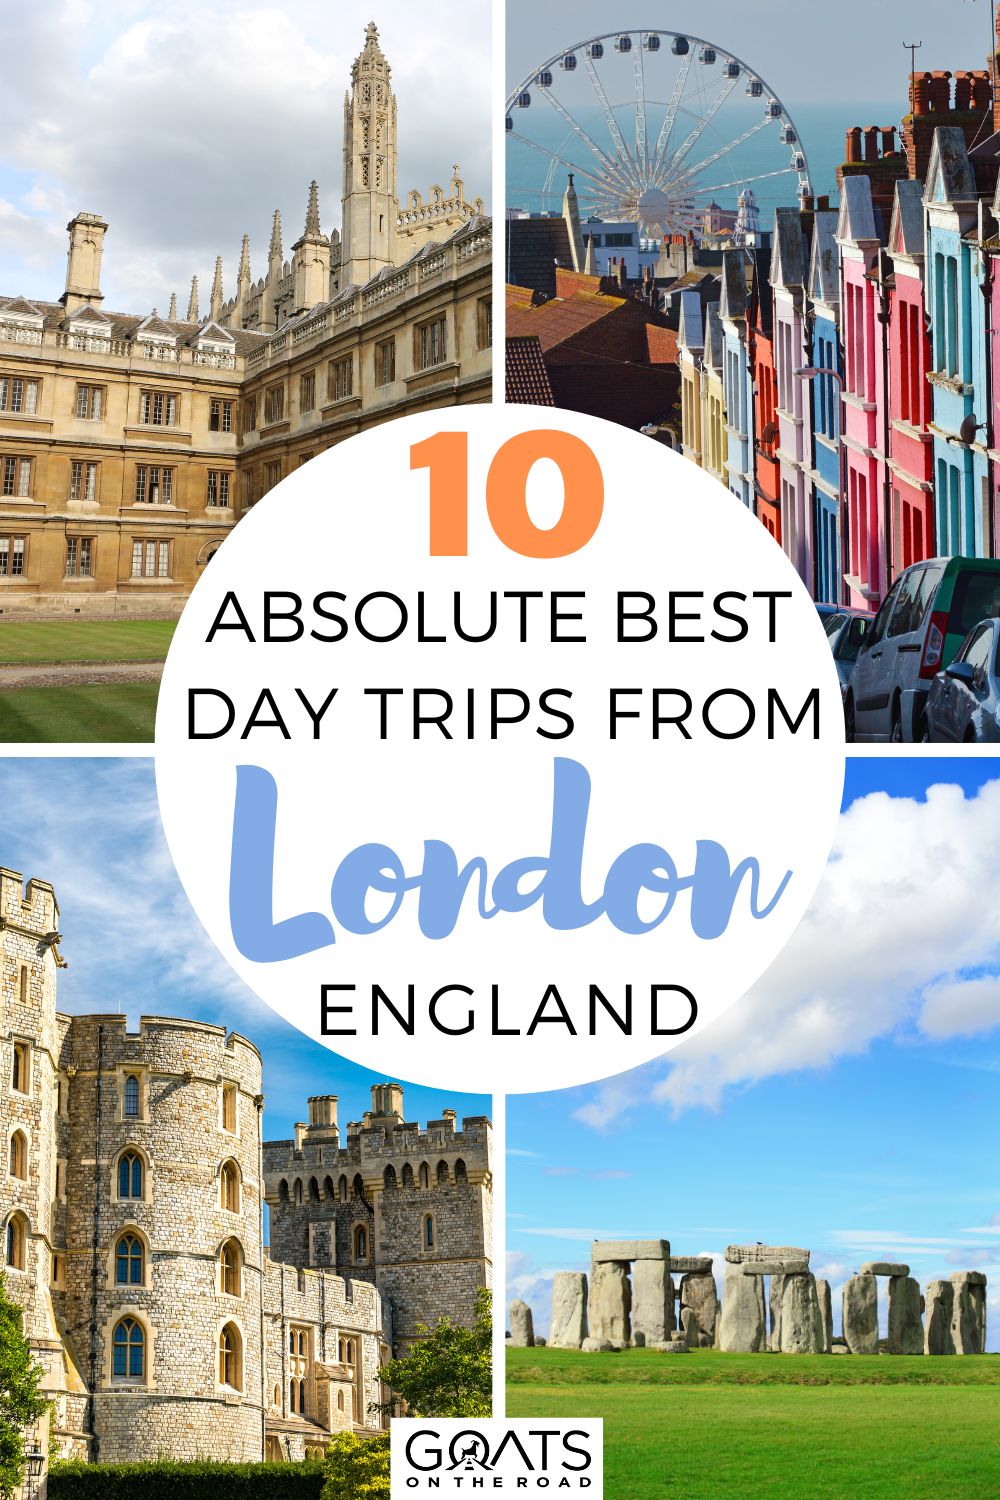 10 Absolute Best Day Trips from London, England